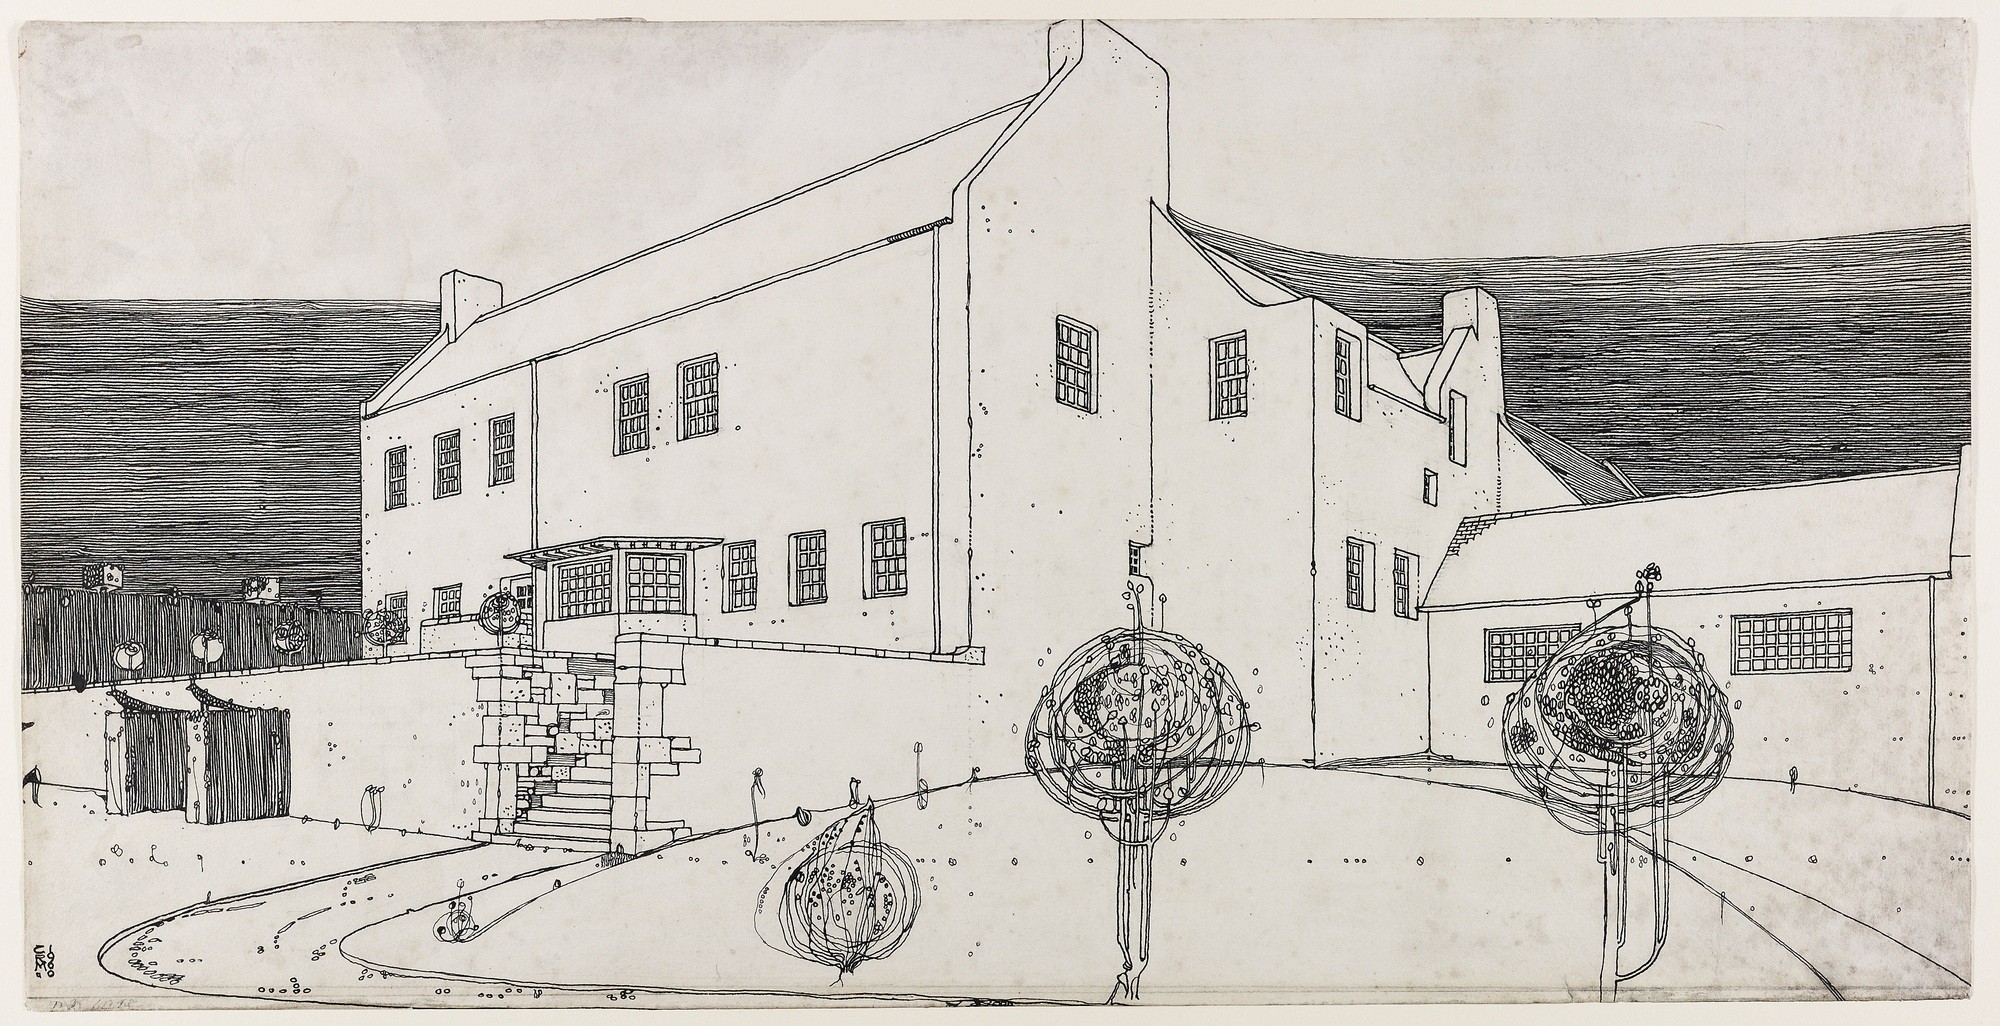 Charles Rennie Mackintosh. Windy Hill, perspective drawing in ink, 1900